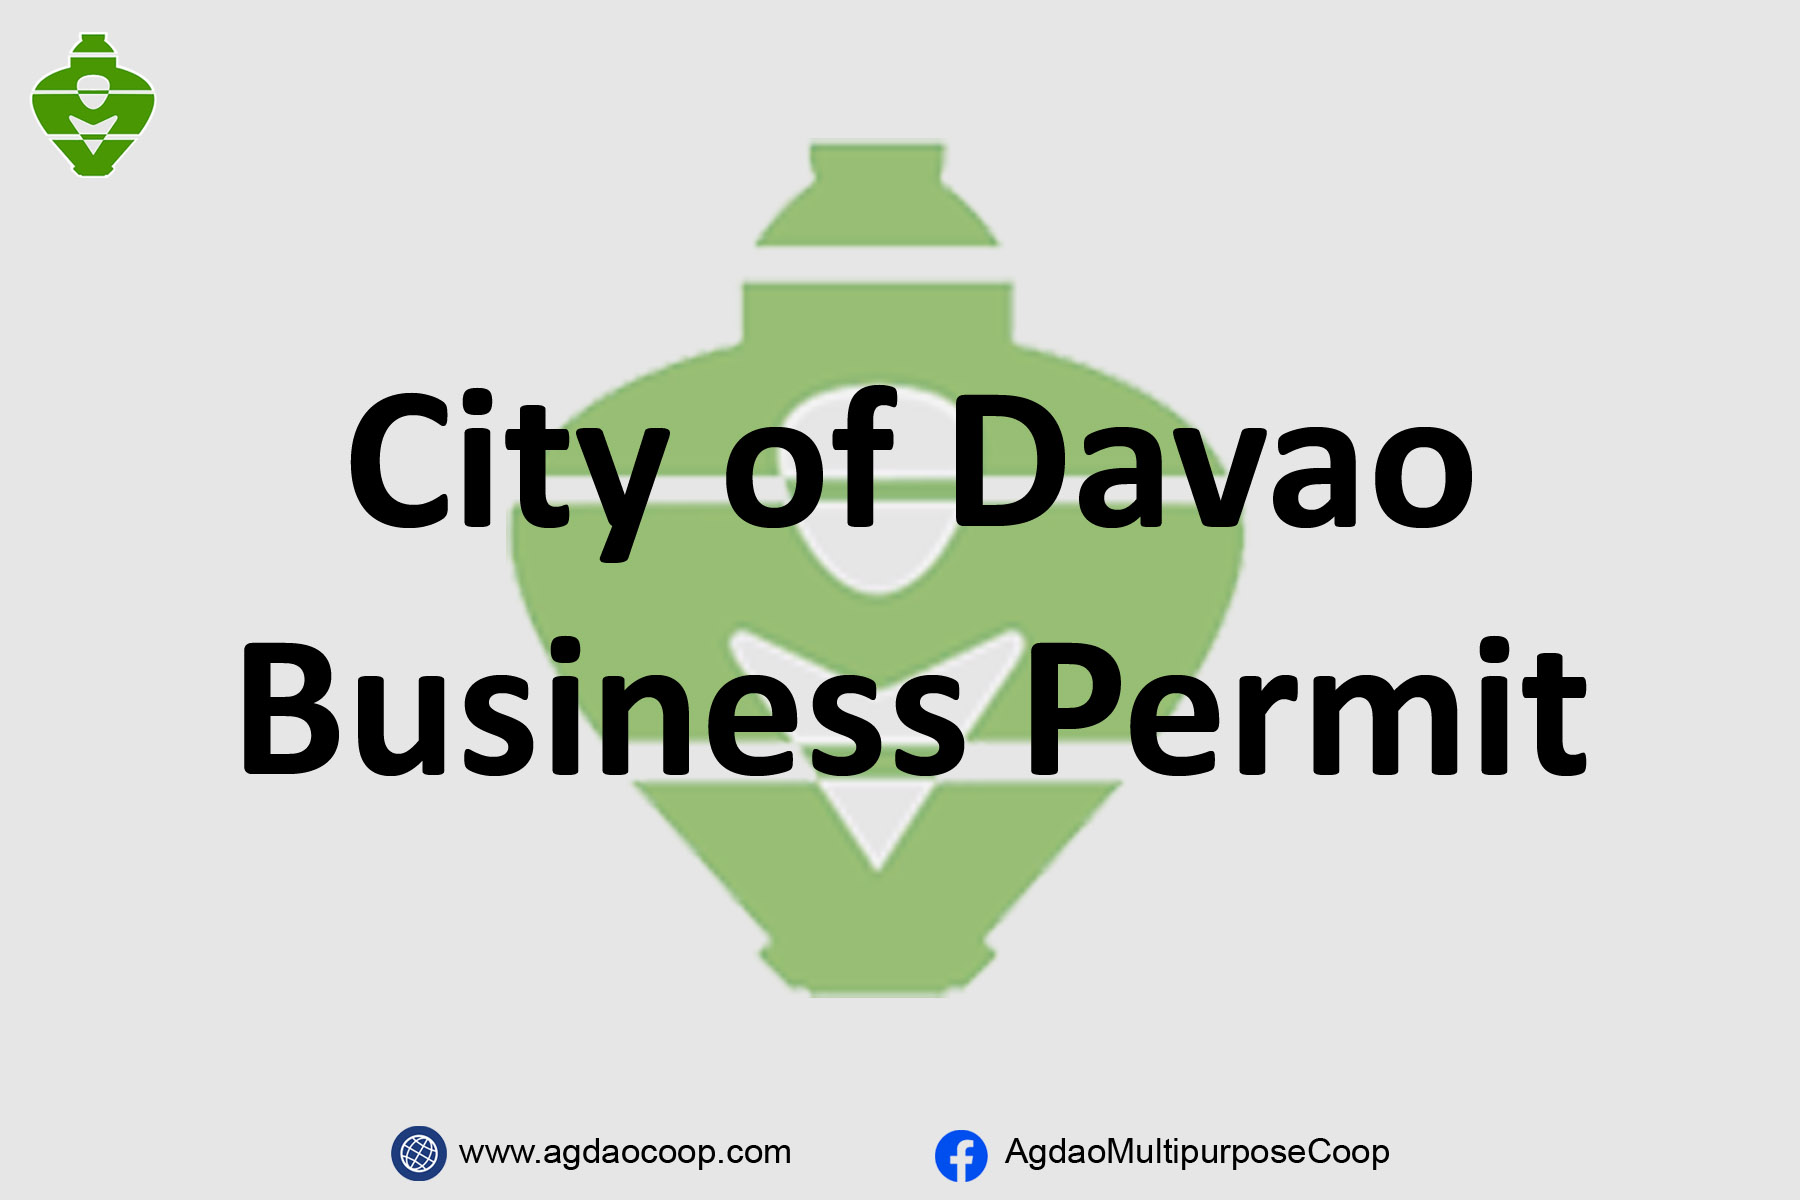 City of Davao Business Permit